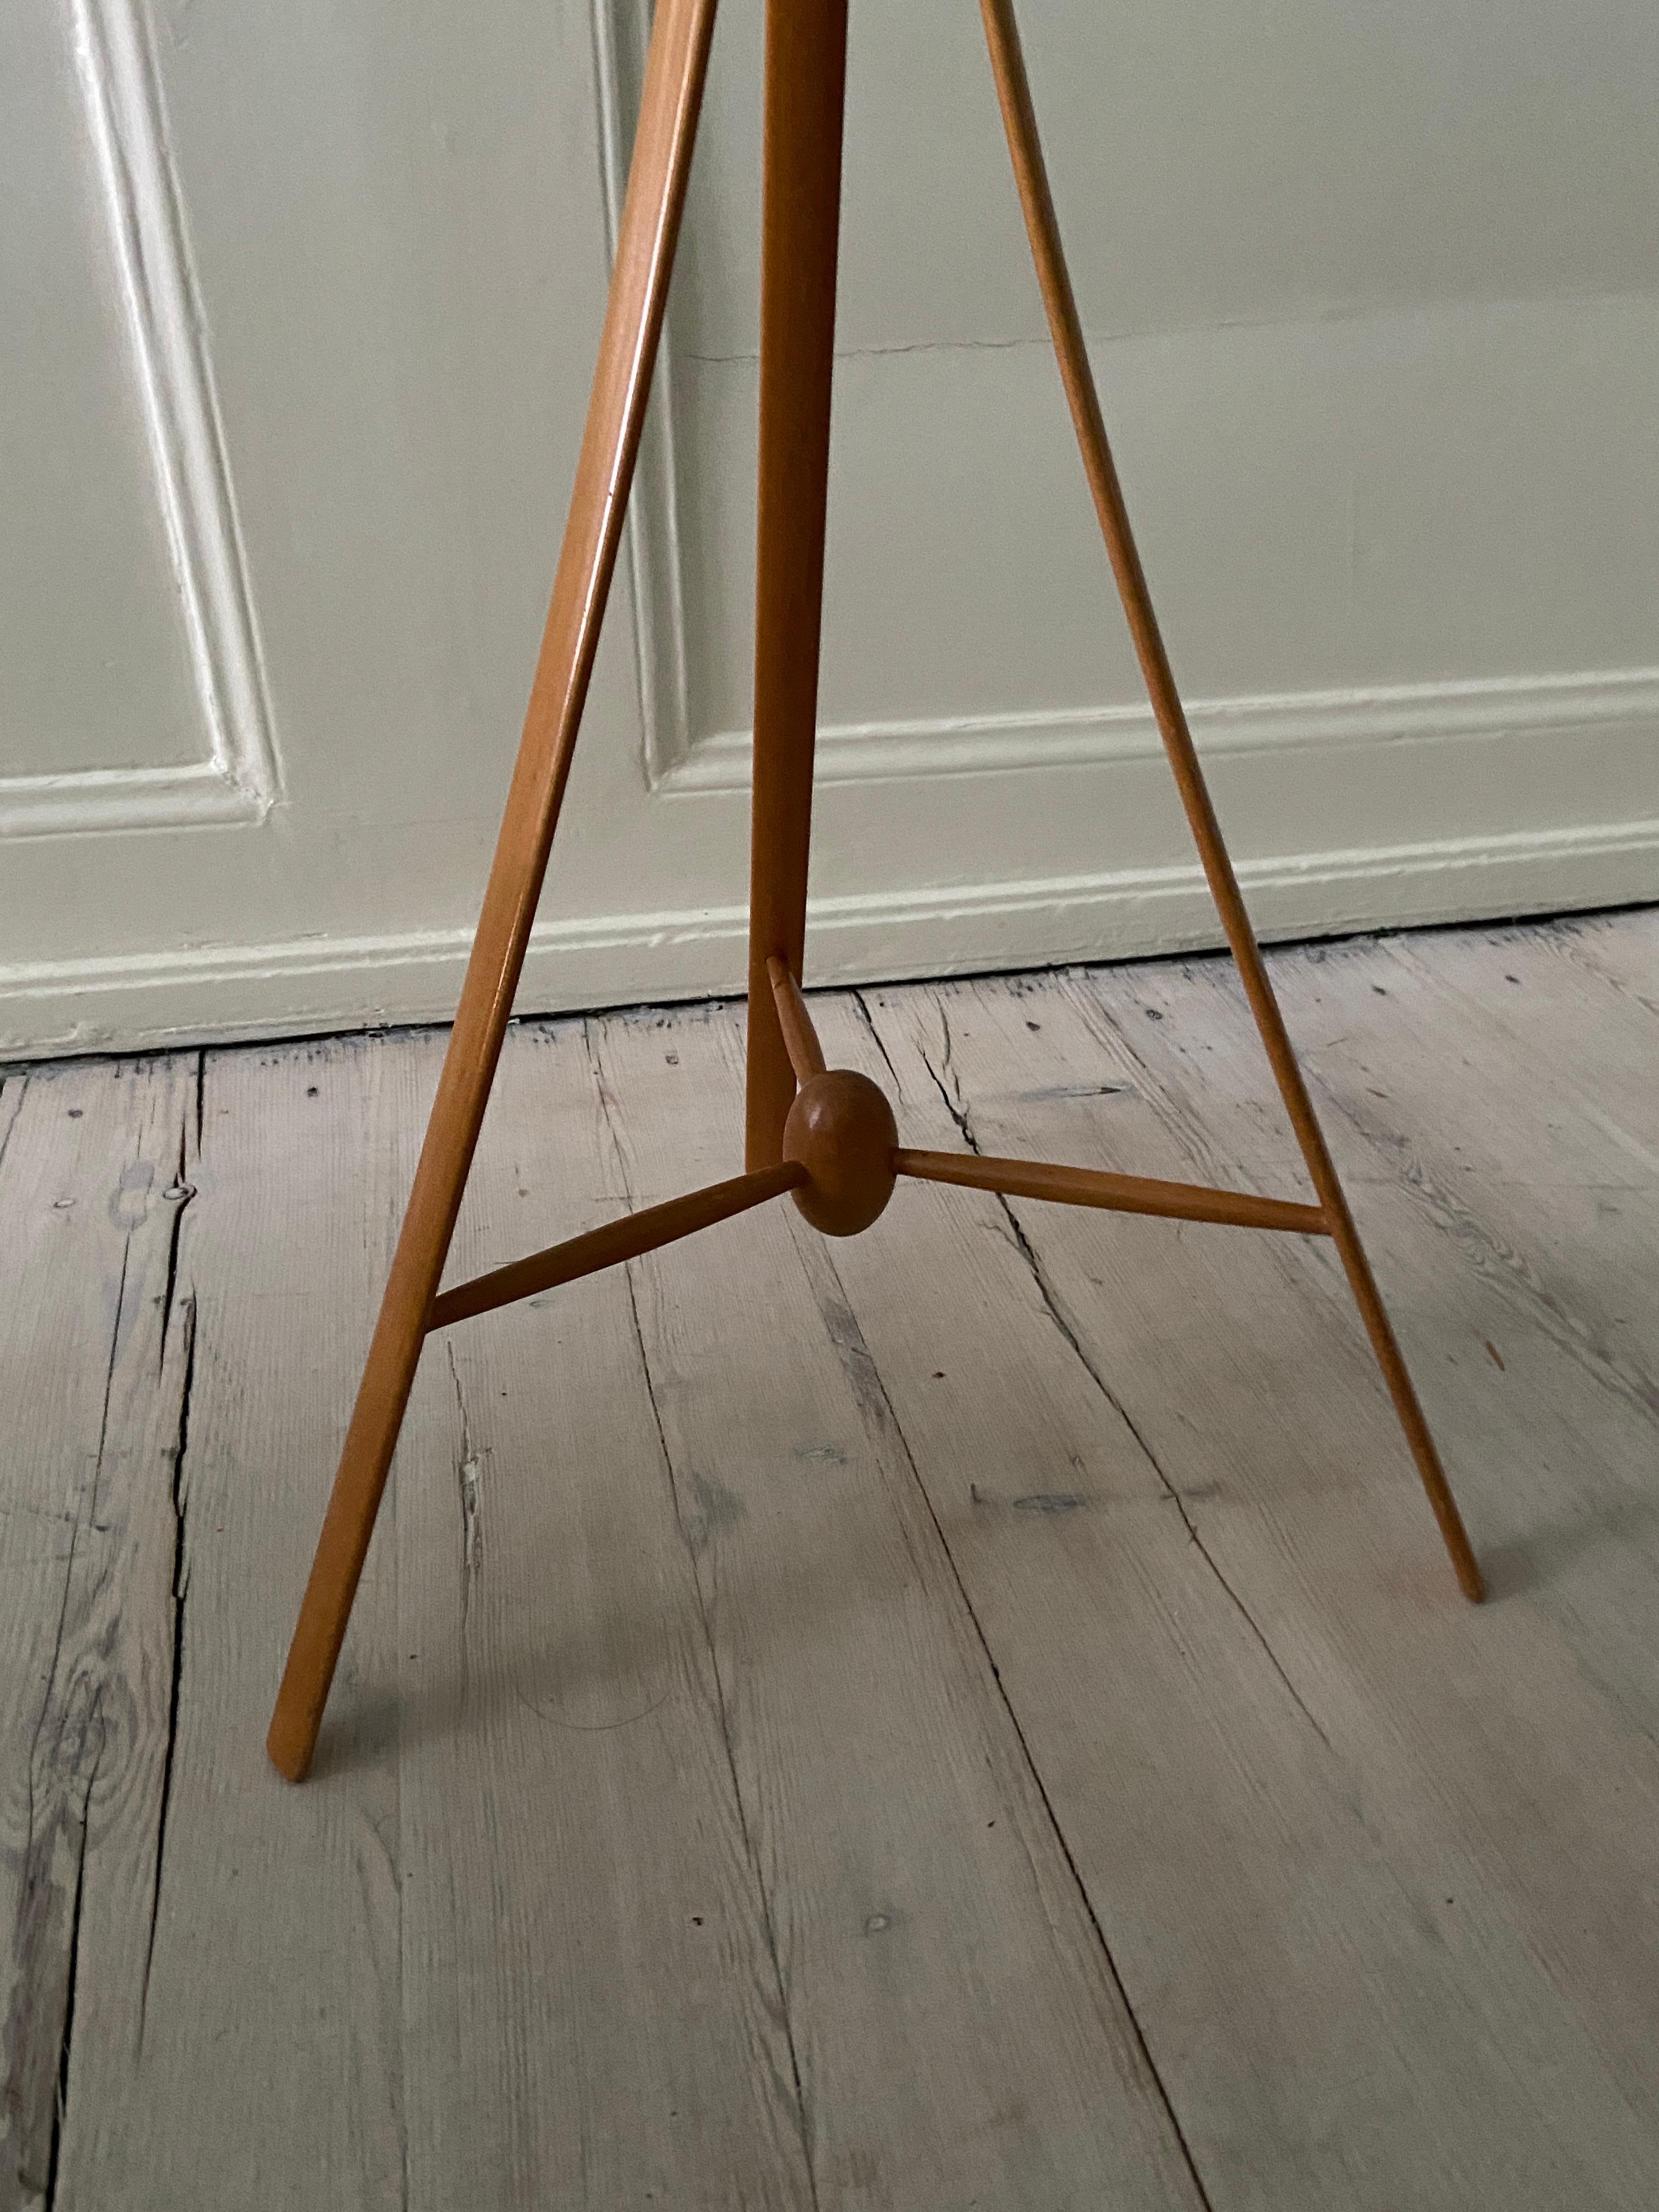 Vintage Alf Svensson Floor Lamp in Birch with Customized Shade, Sweden, 1950s For Sale 2